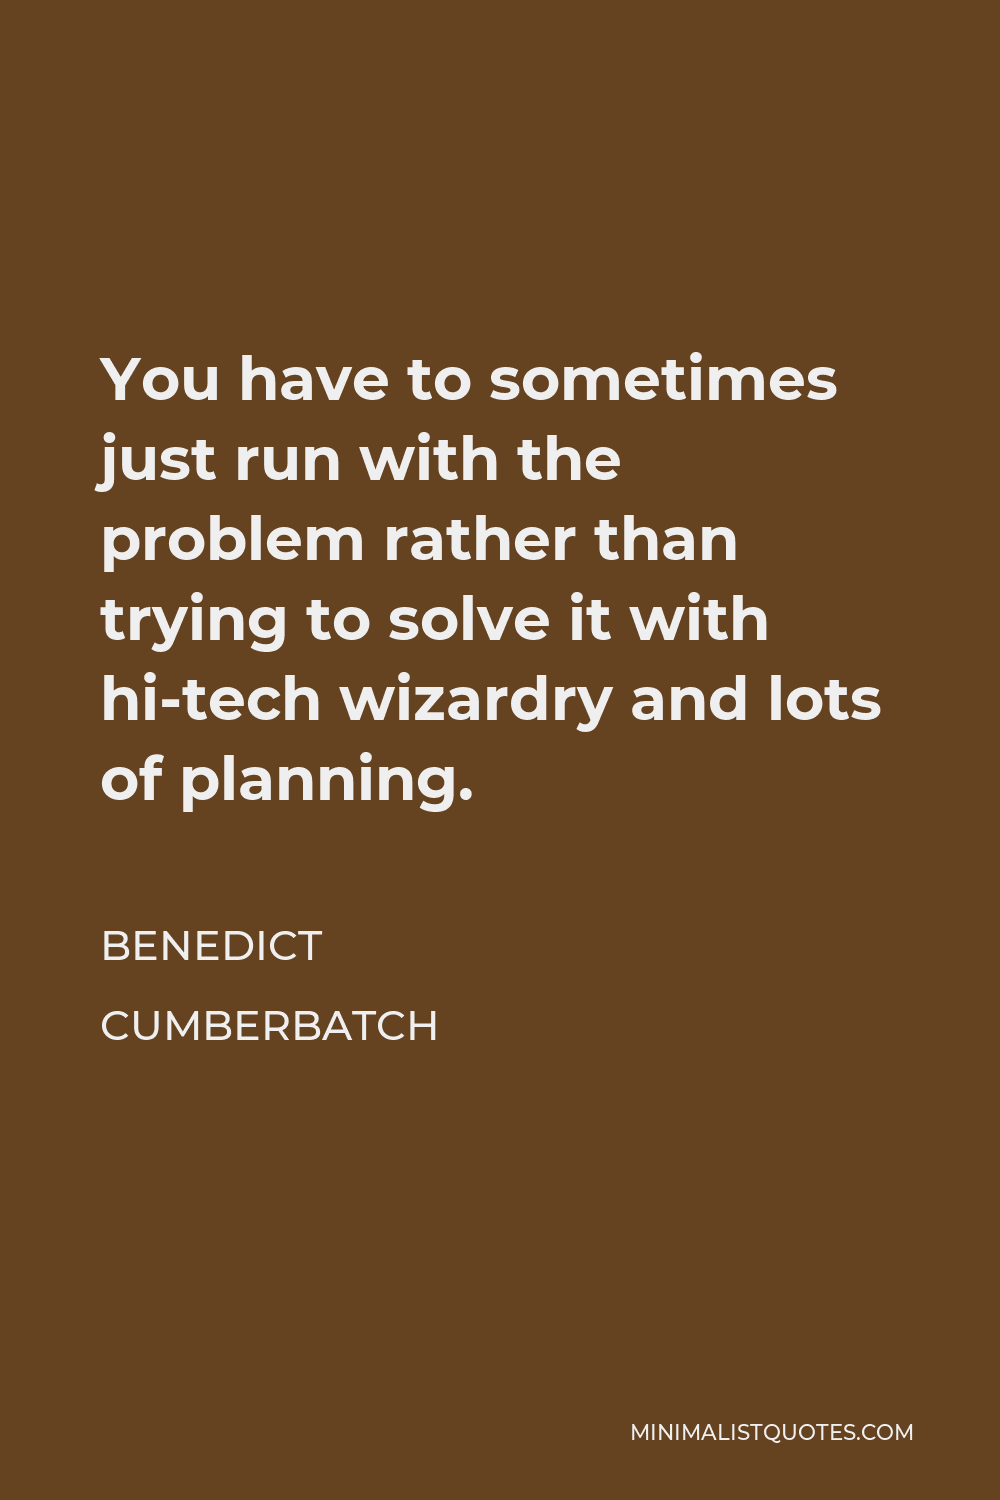 Benedict Cumberbatch Quote - You have to sometimes just run with the problem rather than trying to solve it with hi-tech wizardry and lots of planning.